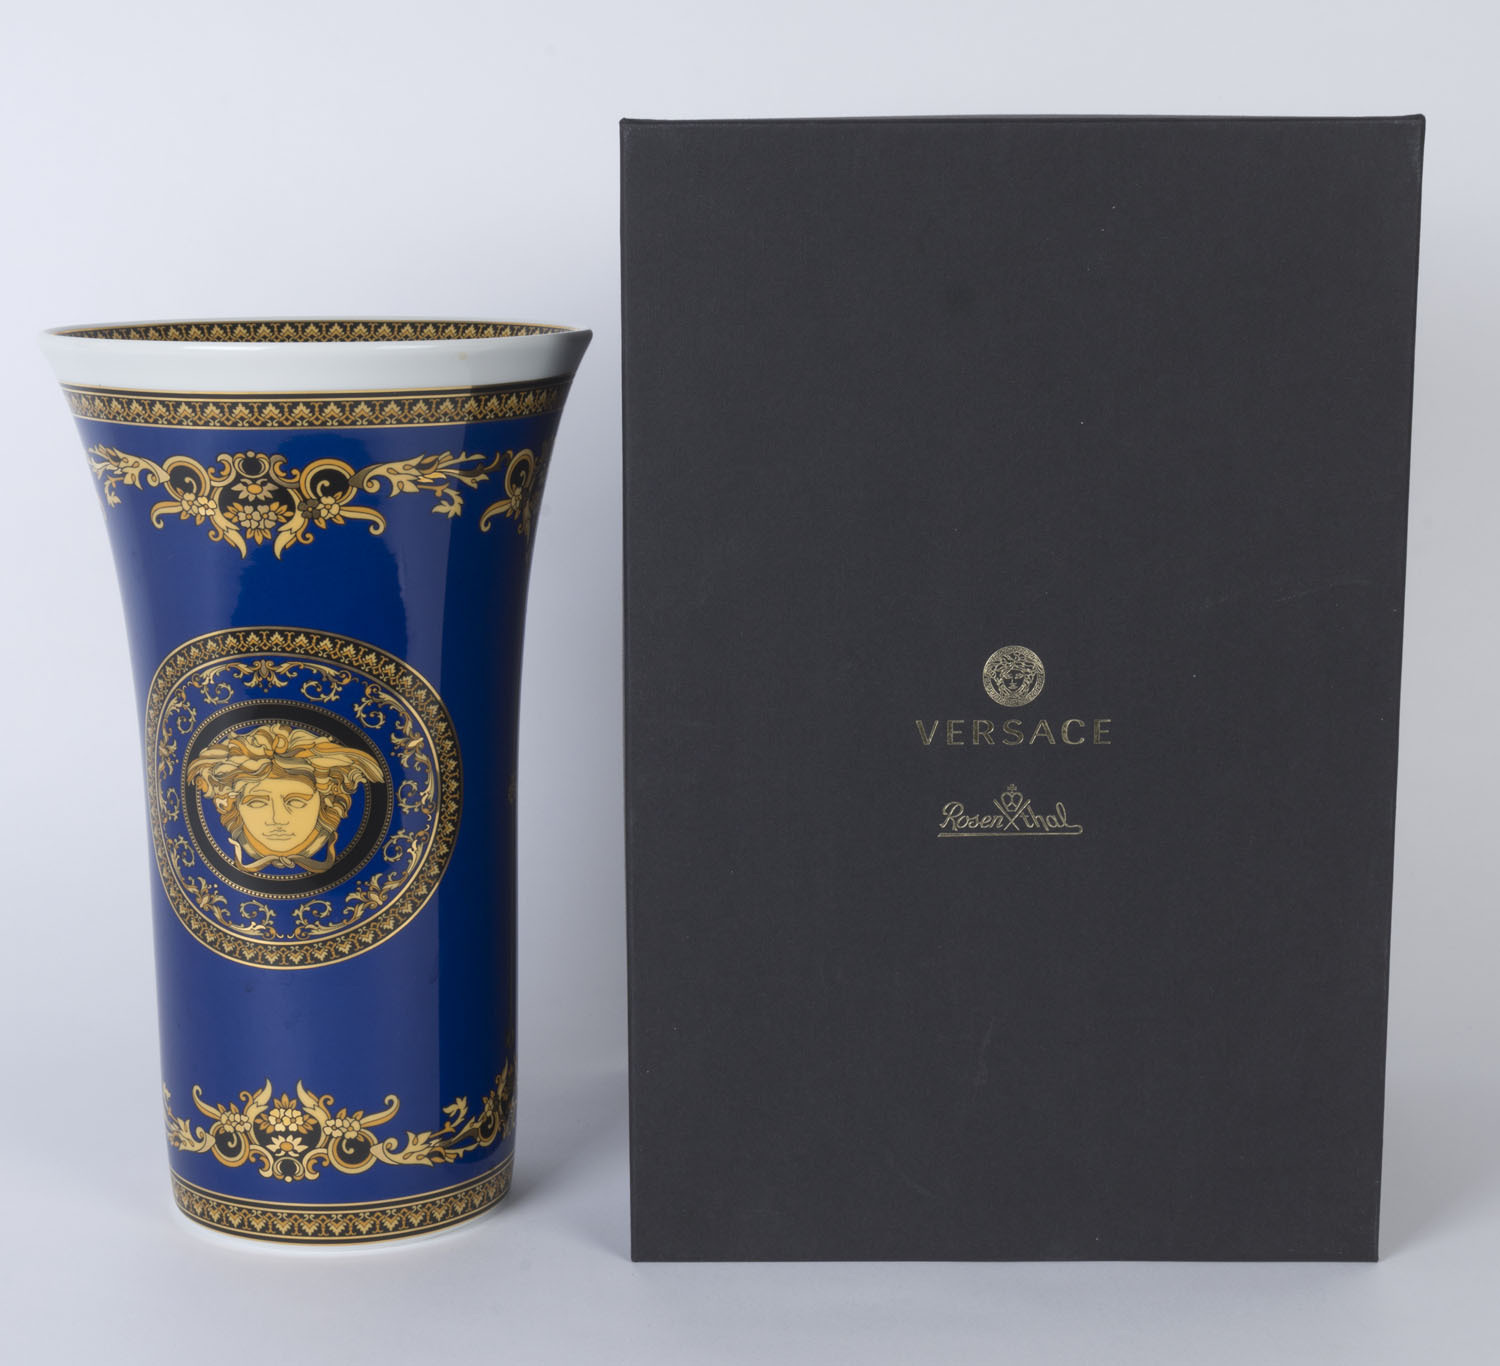 Sold at Auction: Genuine Rosenthal for Versace *NEW* In Box - Gold